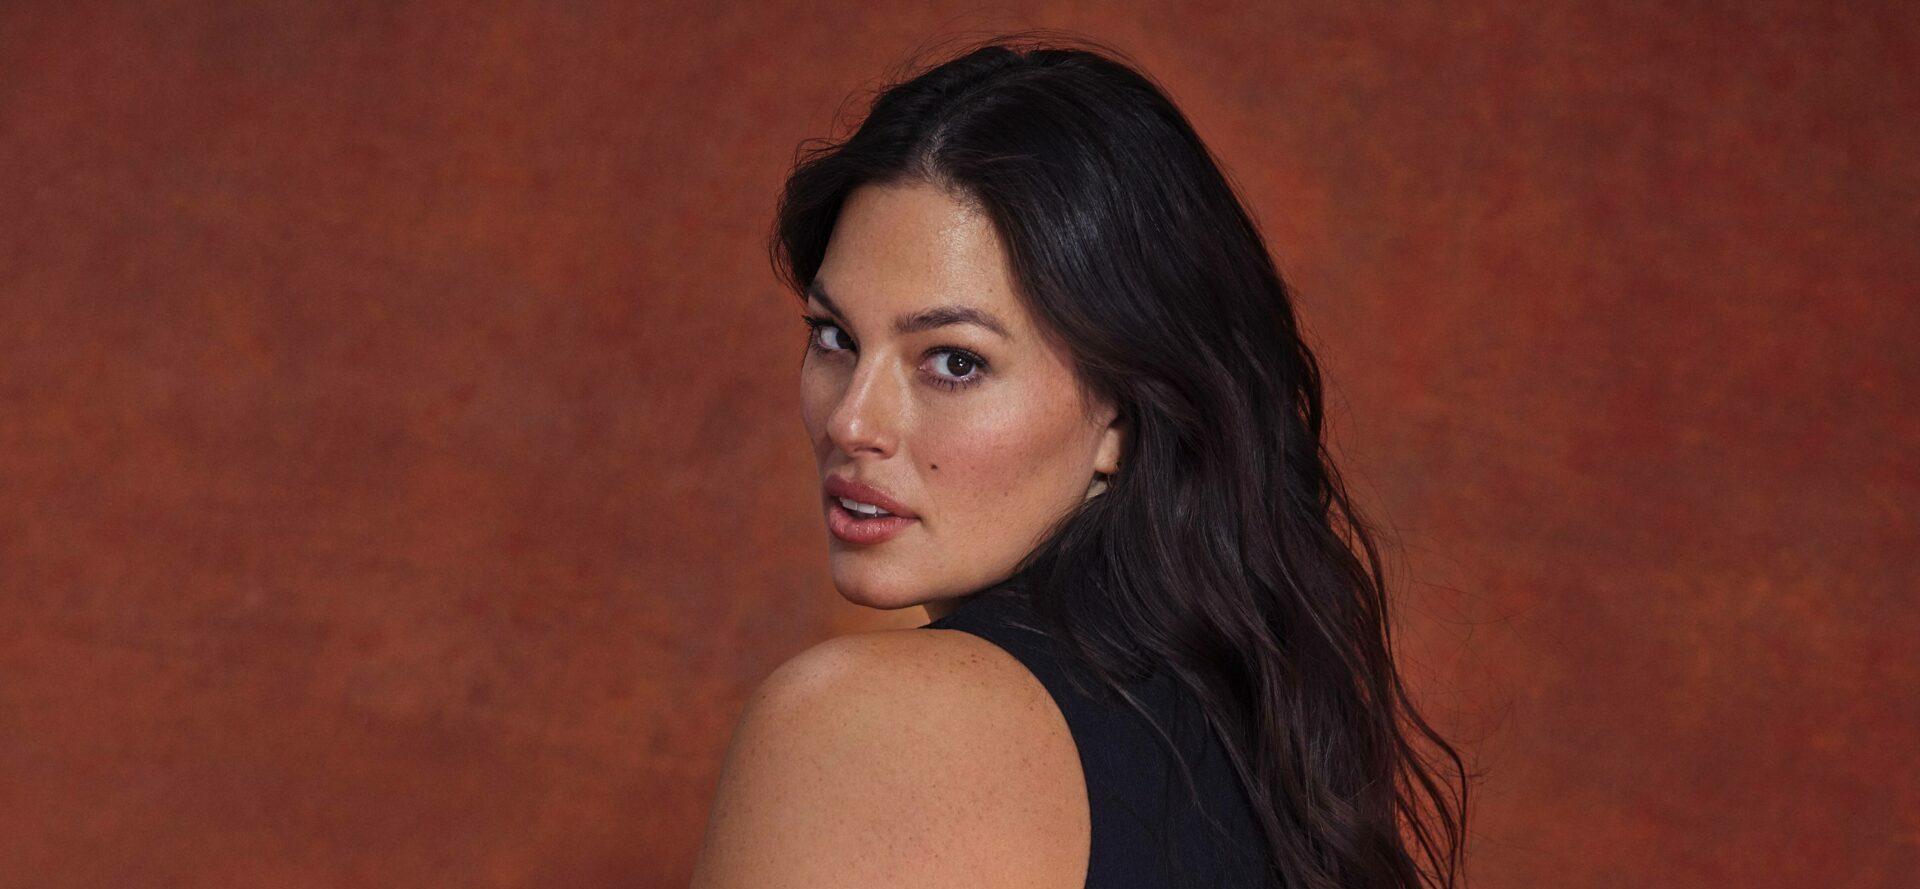 Ashley Graham Gives Goddess Vibes With Gold Jewelry & Clingy Dress